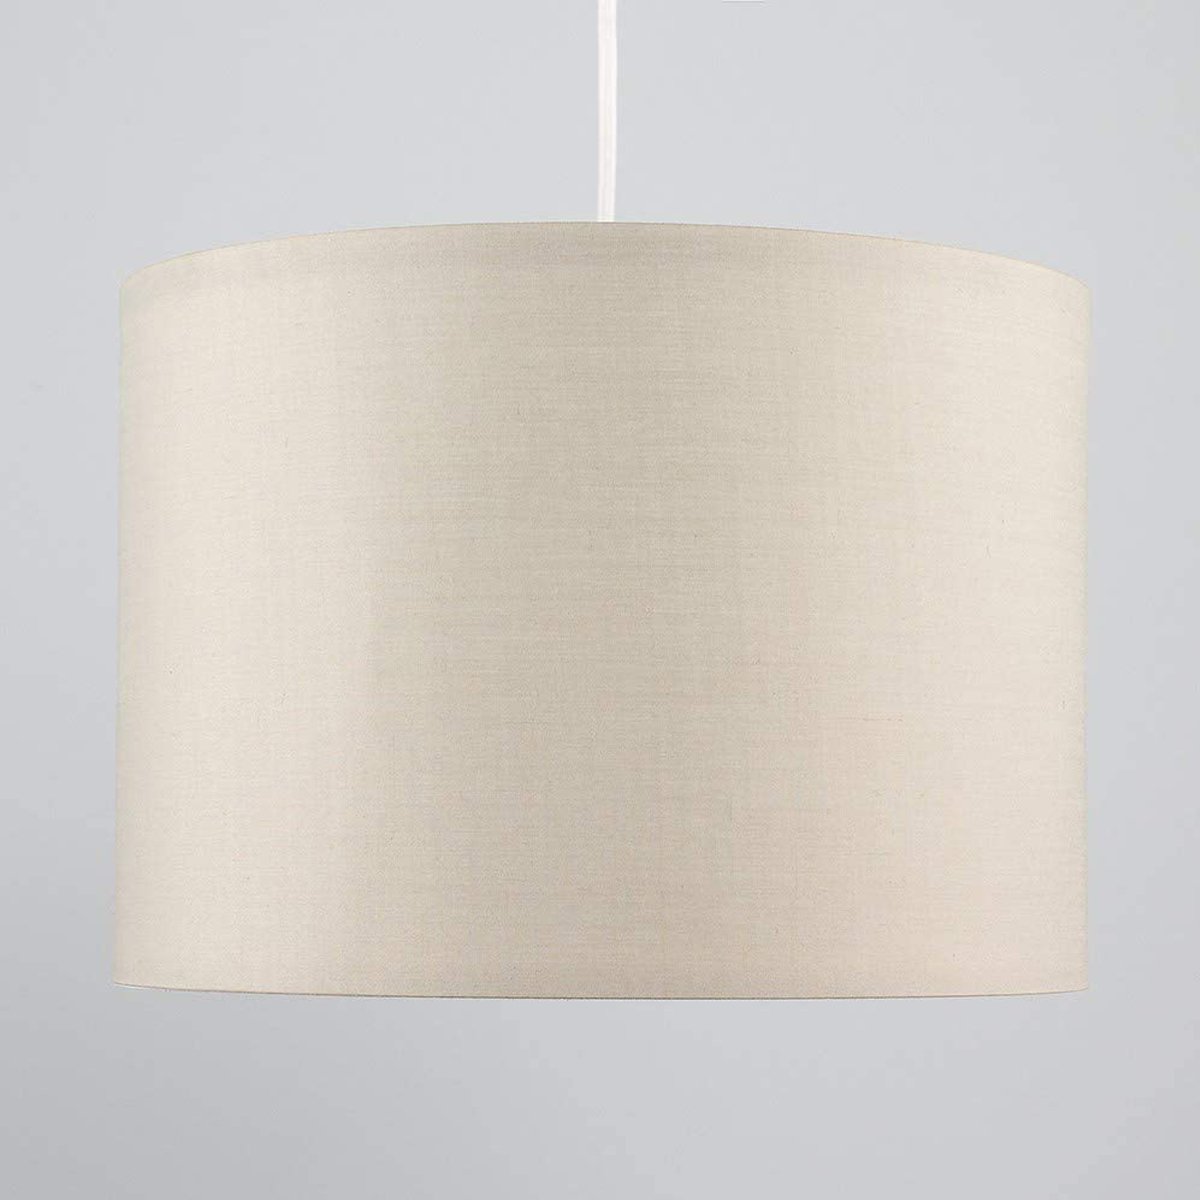 Our Lupo luxury cotton shade is sophisticated in appearance and we have designed the shade to suit a range of interiors. Easy to fit, it’s crafted from high-quality cotton on the outer and has a reflective silver metallic inner. It's made to fit both a ceiling light or lamp base.